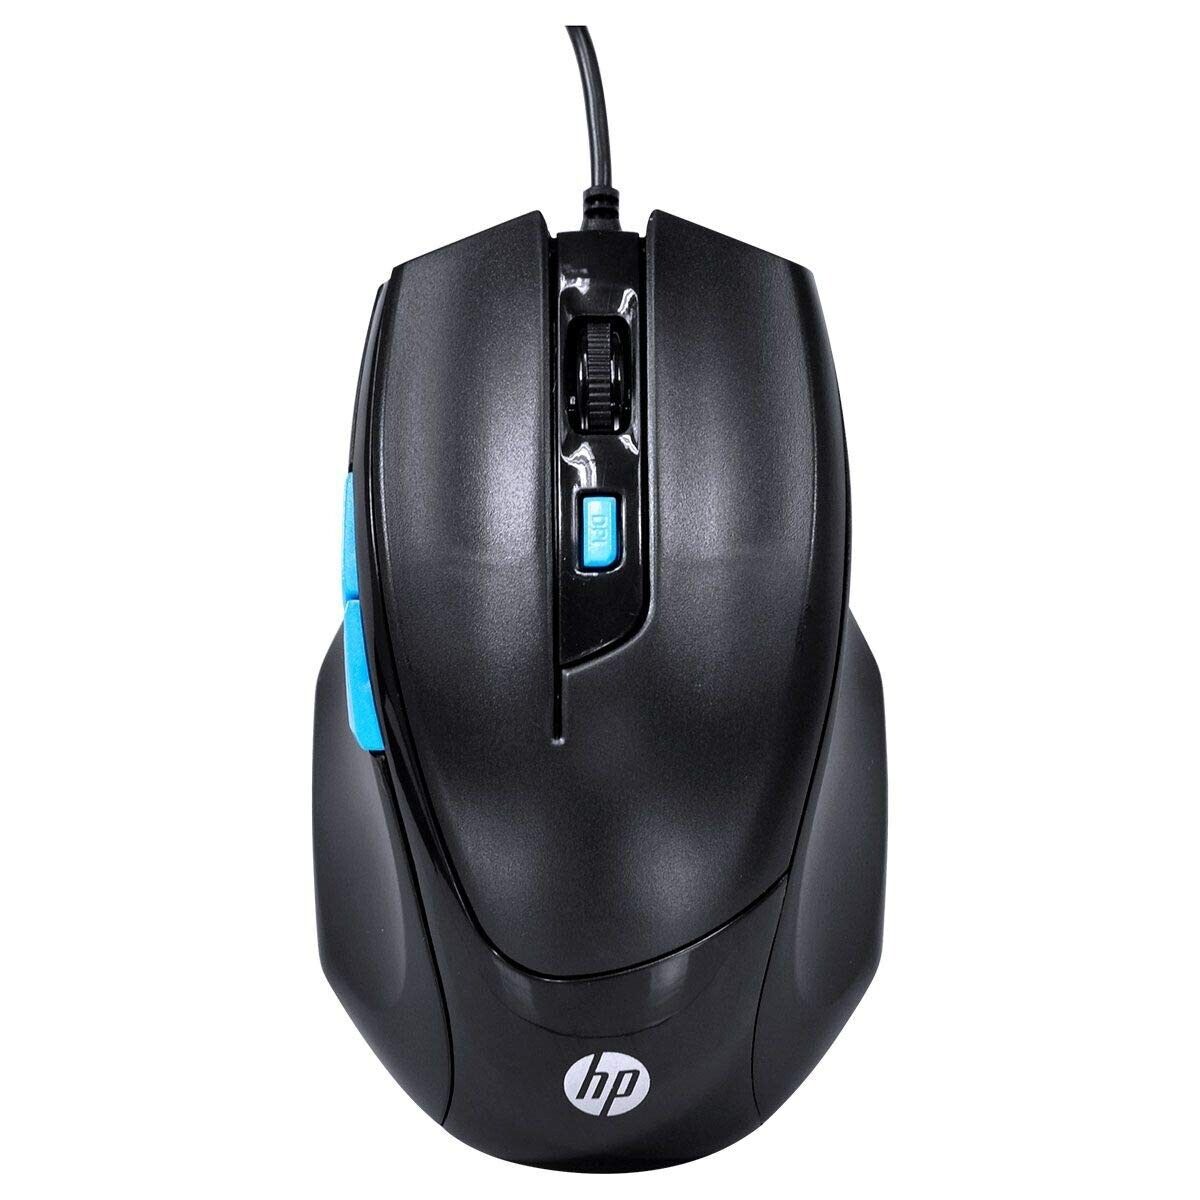 HP M150 Wired Gaming Mouse 2000 DPI